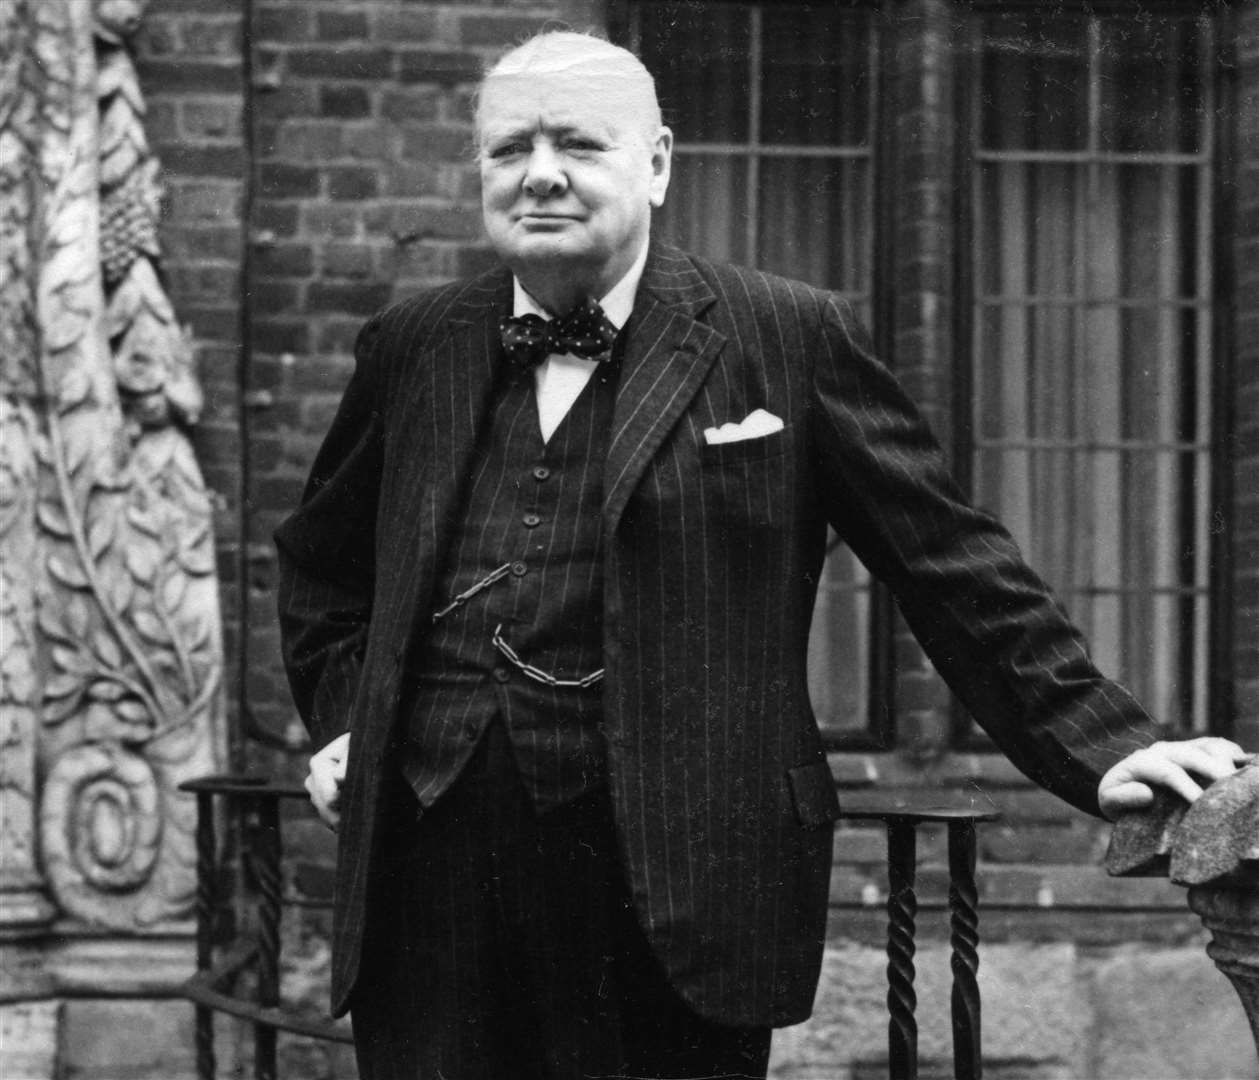 Winston Churchill at home in Chartwell Picture: National Trust